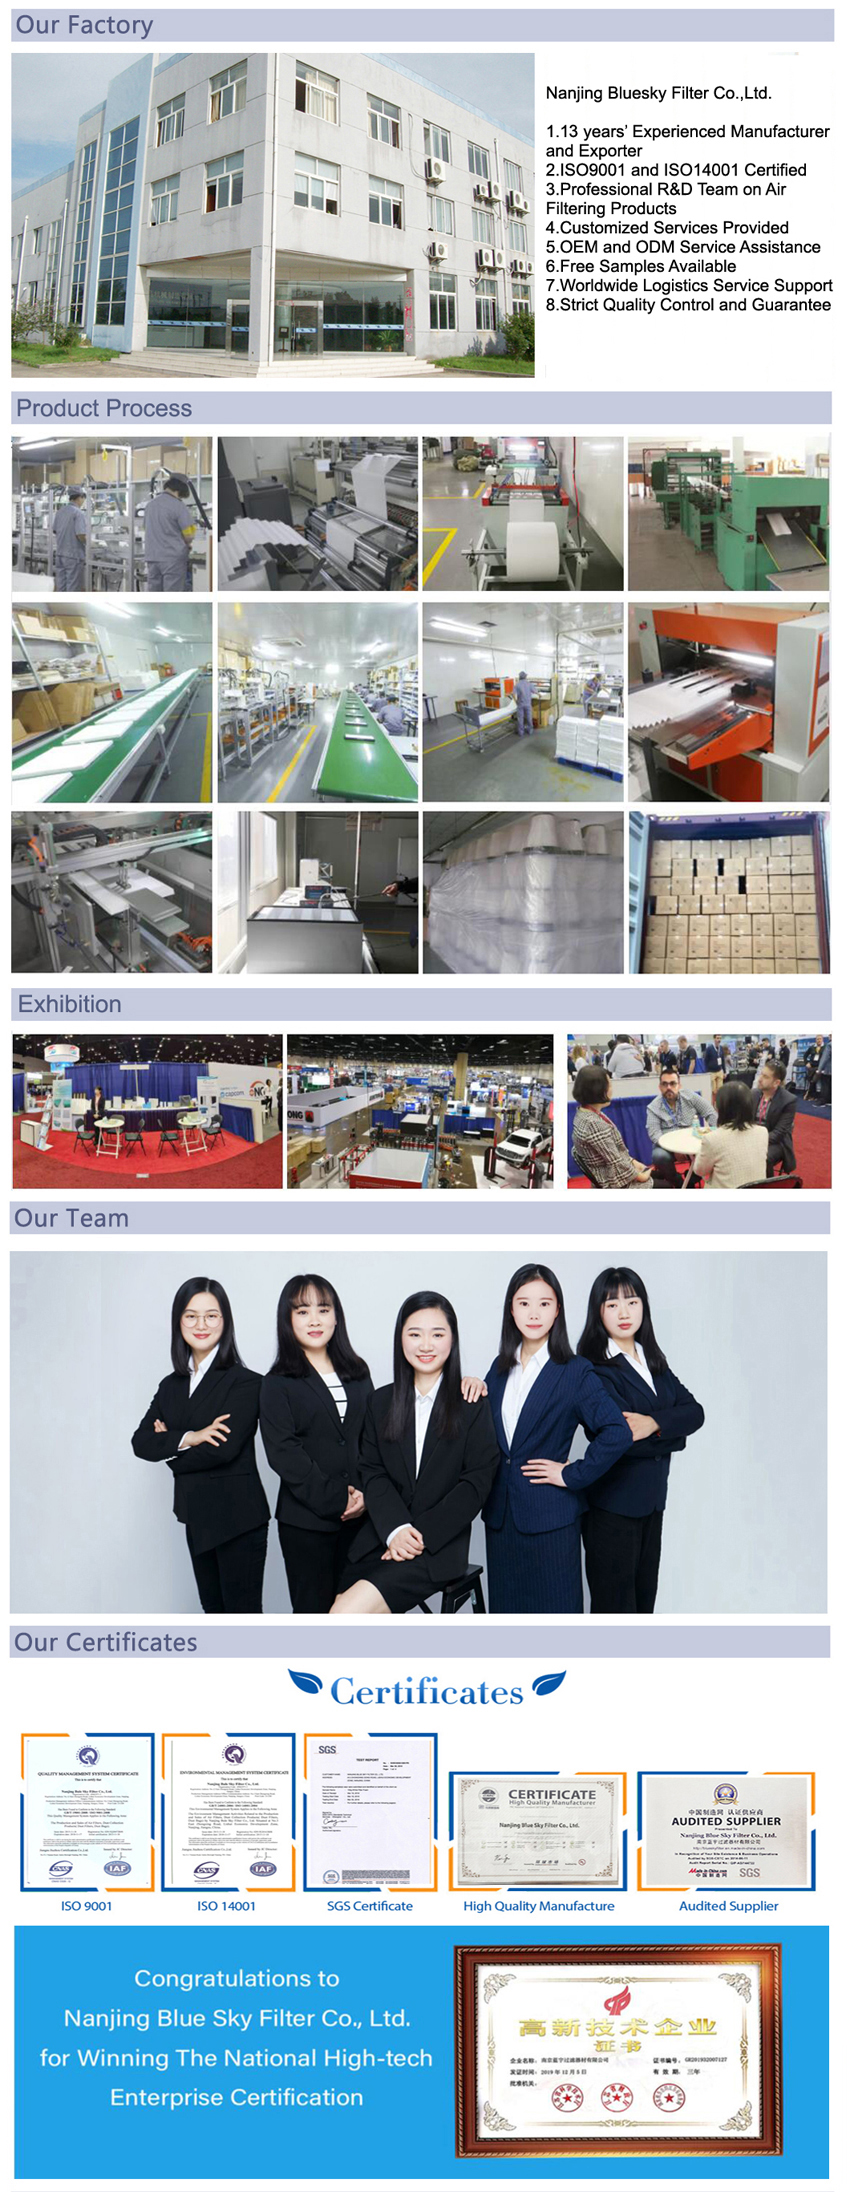 Our Company of LG Washable Filter